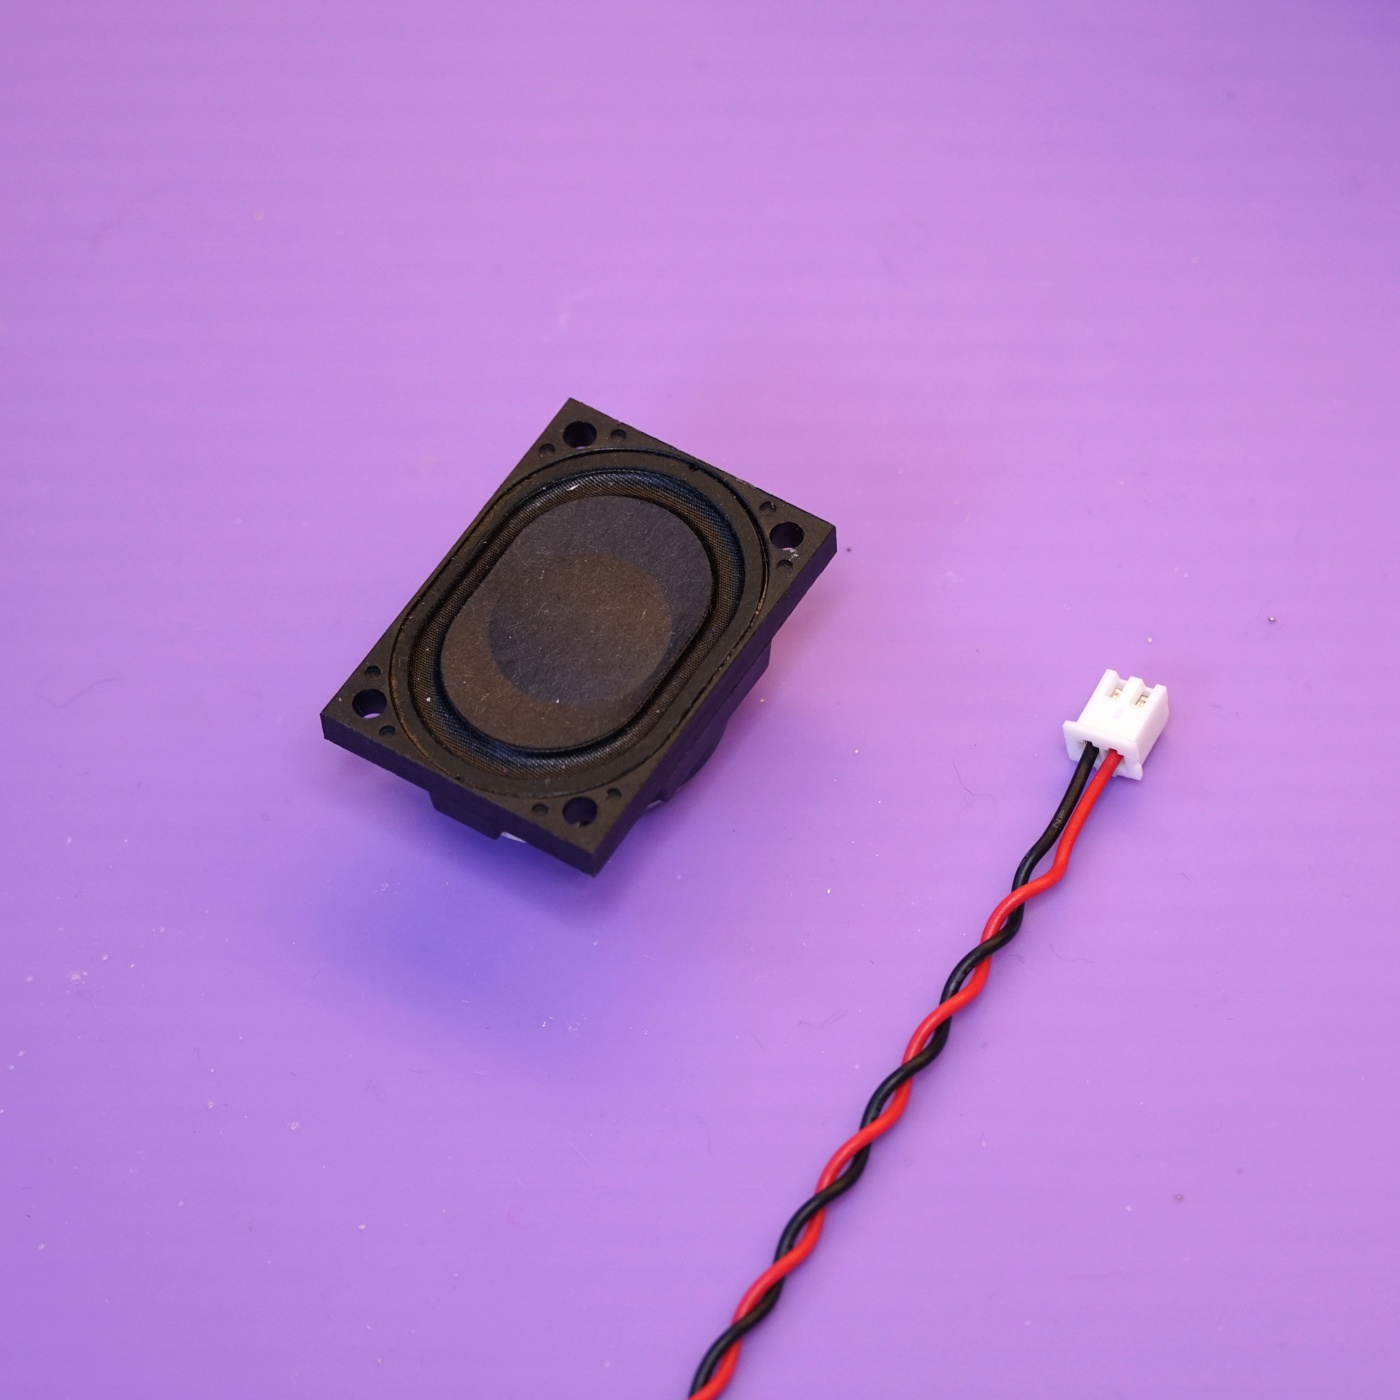 The speaker and the JST wiring harness